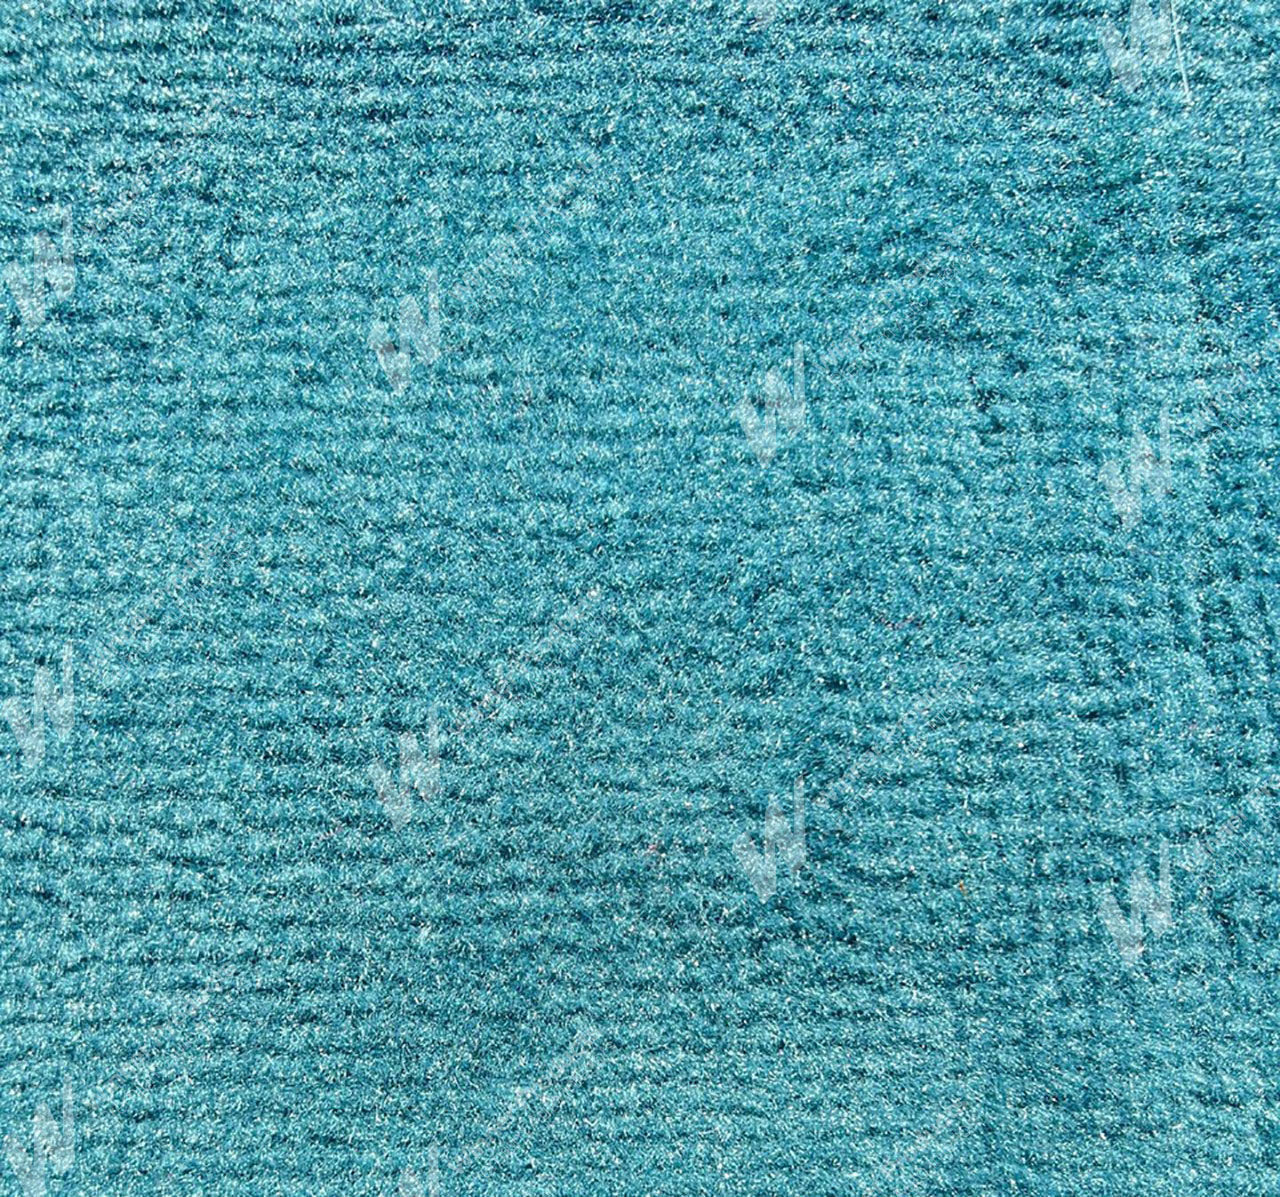 Holden Commodore VK SS Group 3 23X Cerulean Carpet (Image 1 of 1)